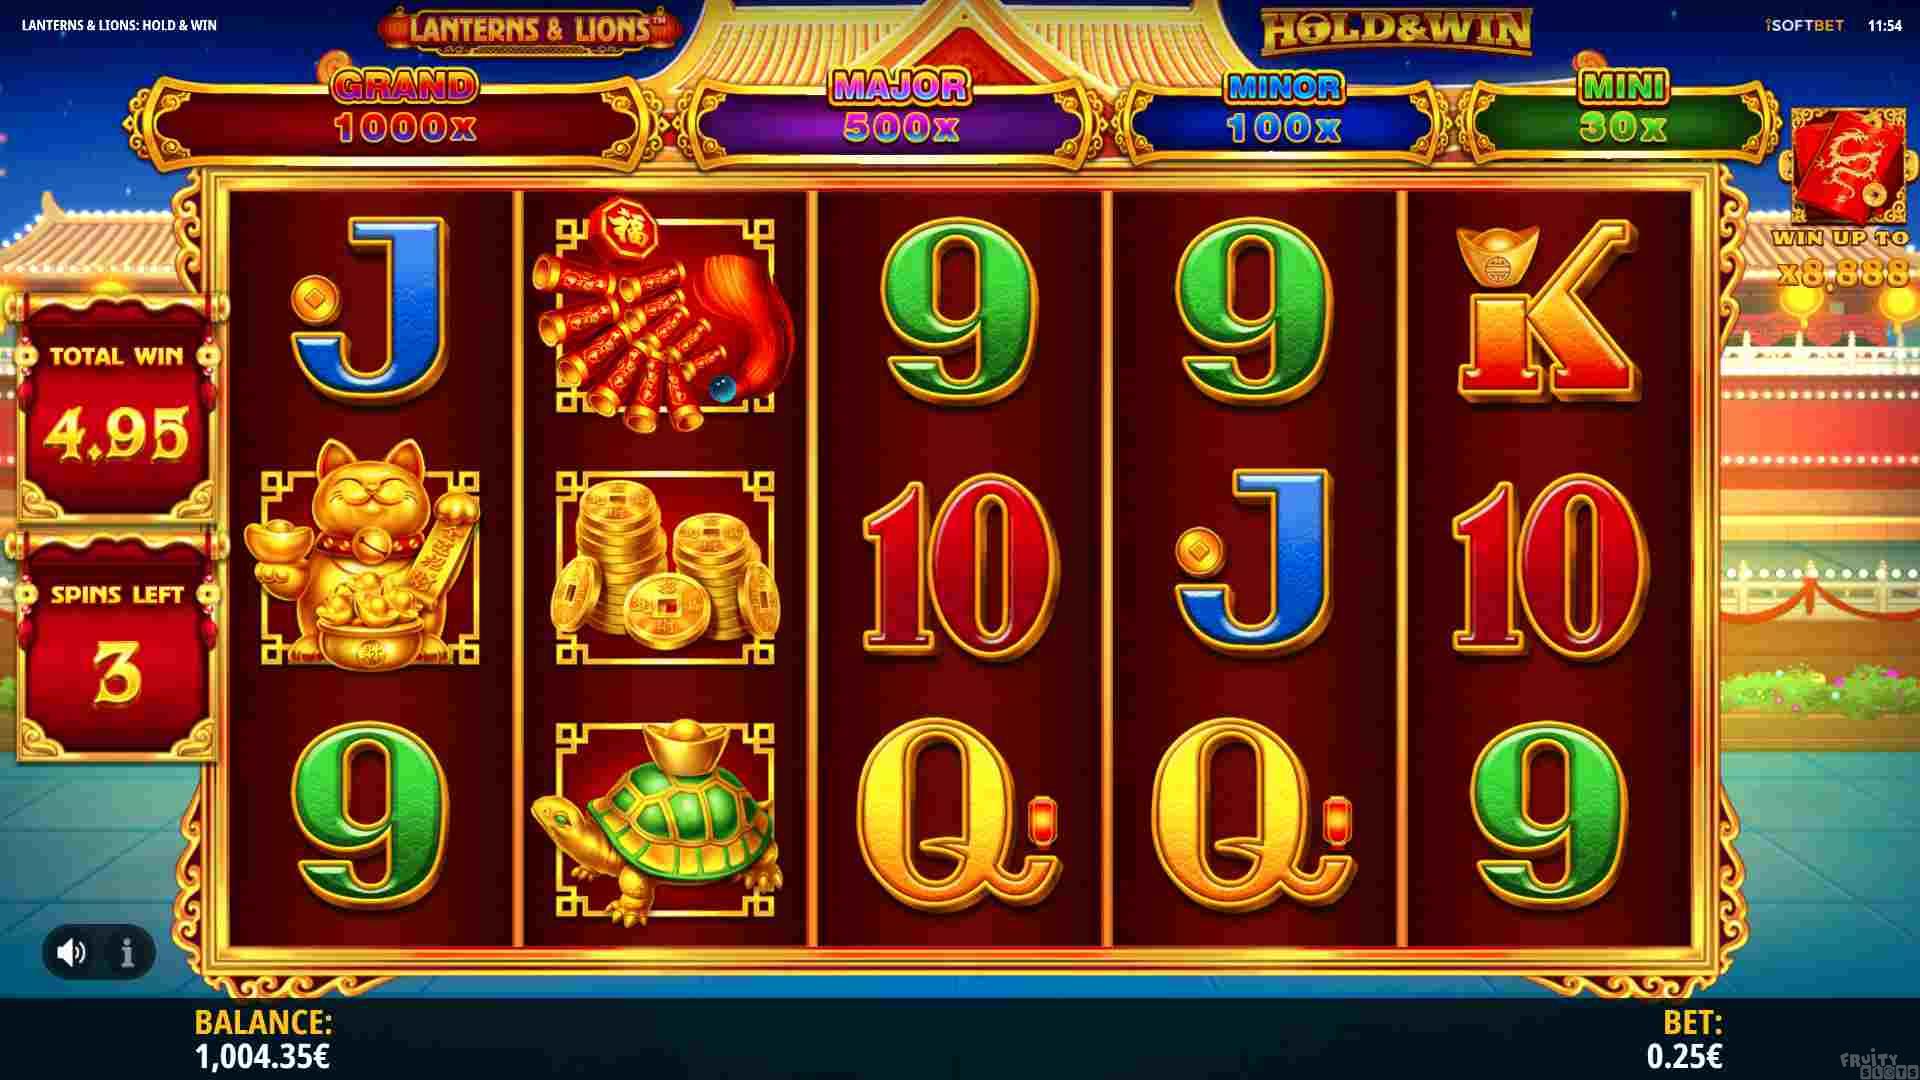 Lanterns & Lions Hold & Win Free Spins